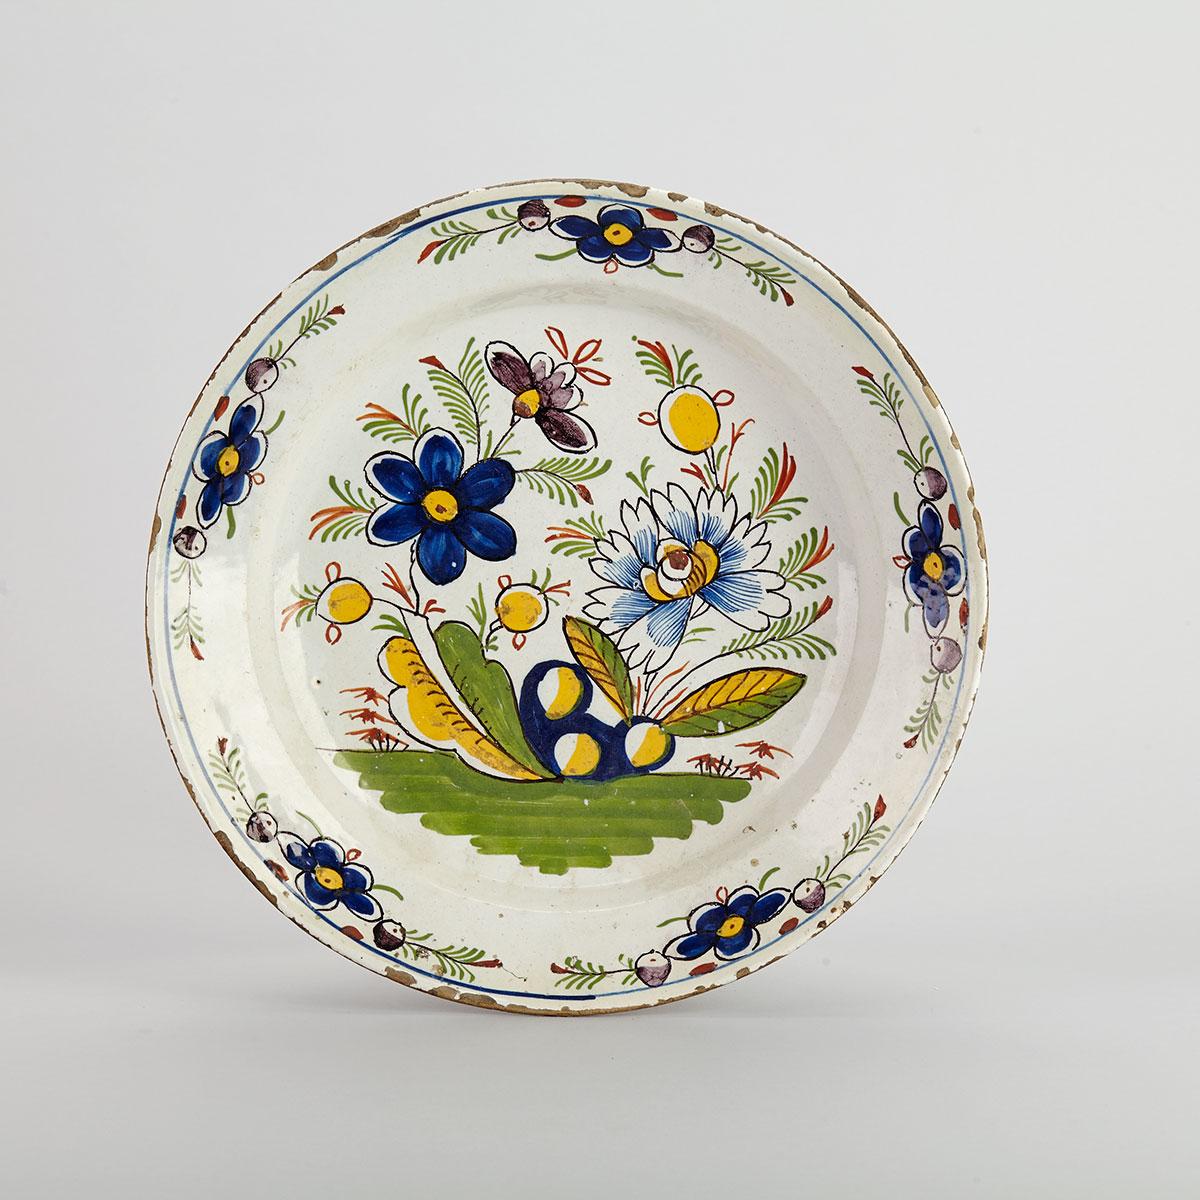 Delft Polychrome Charger, 18th century